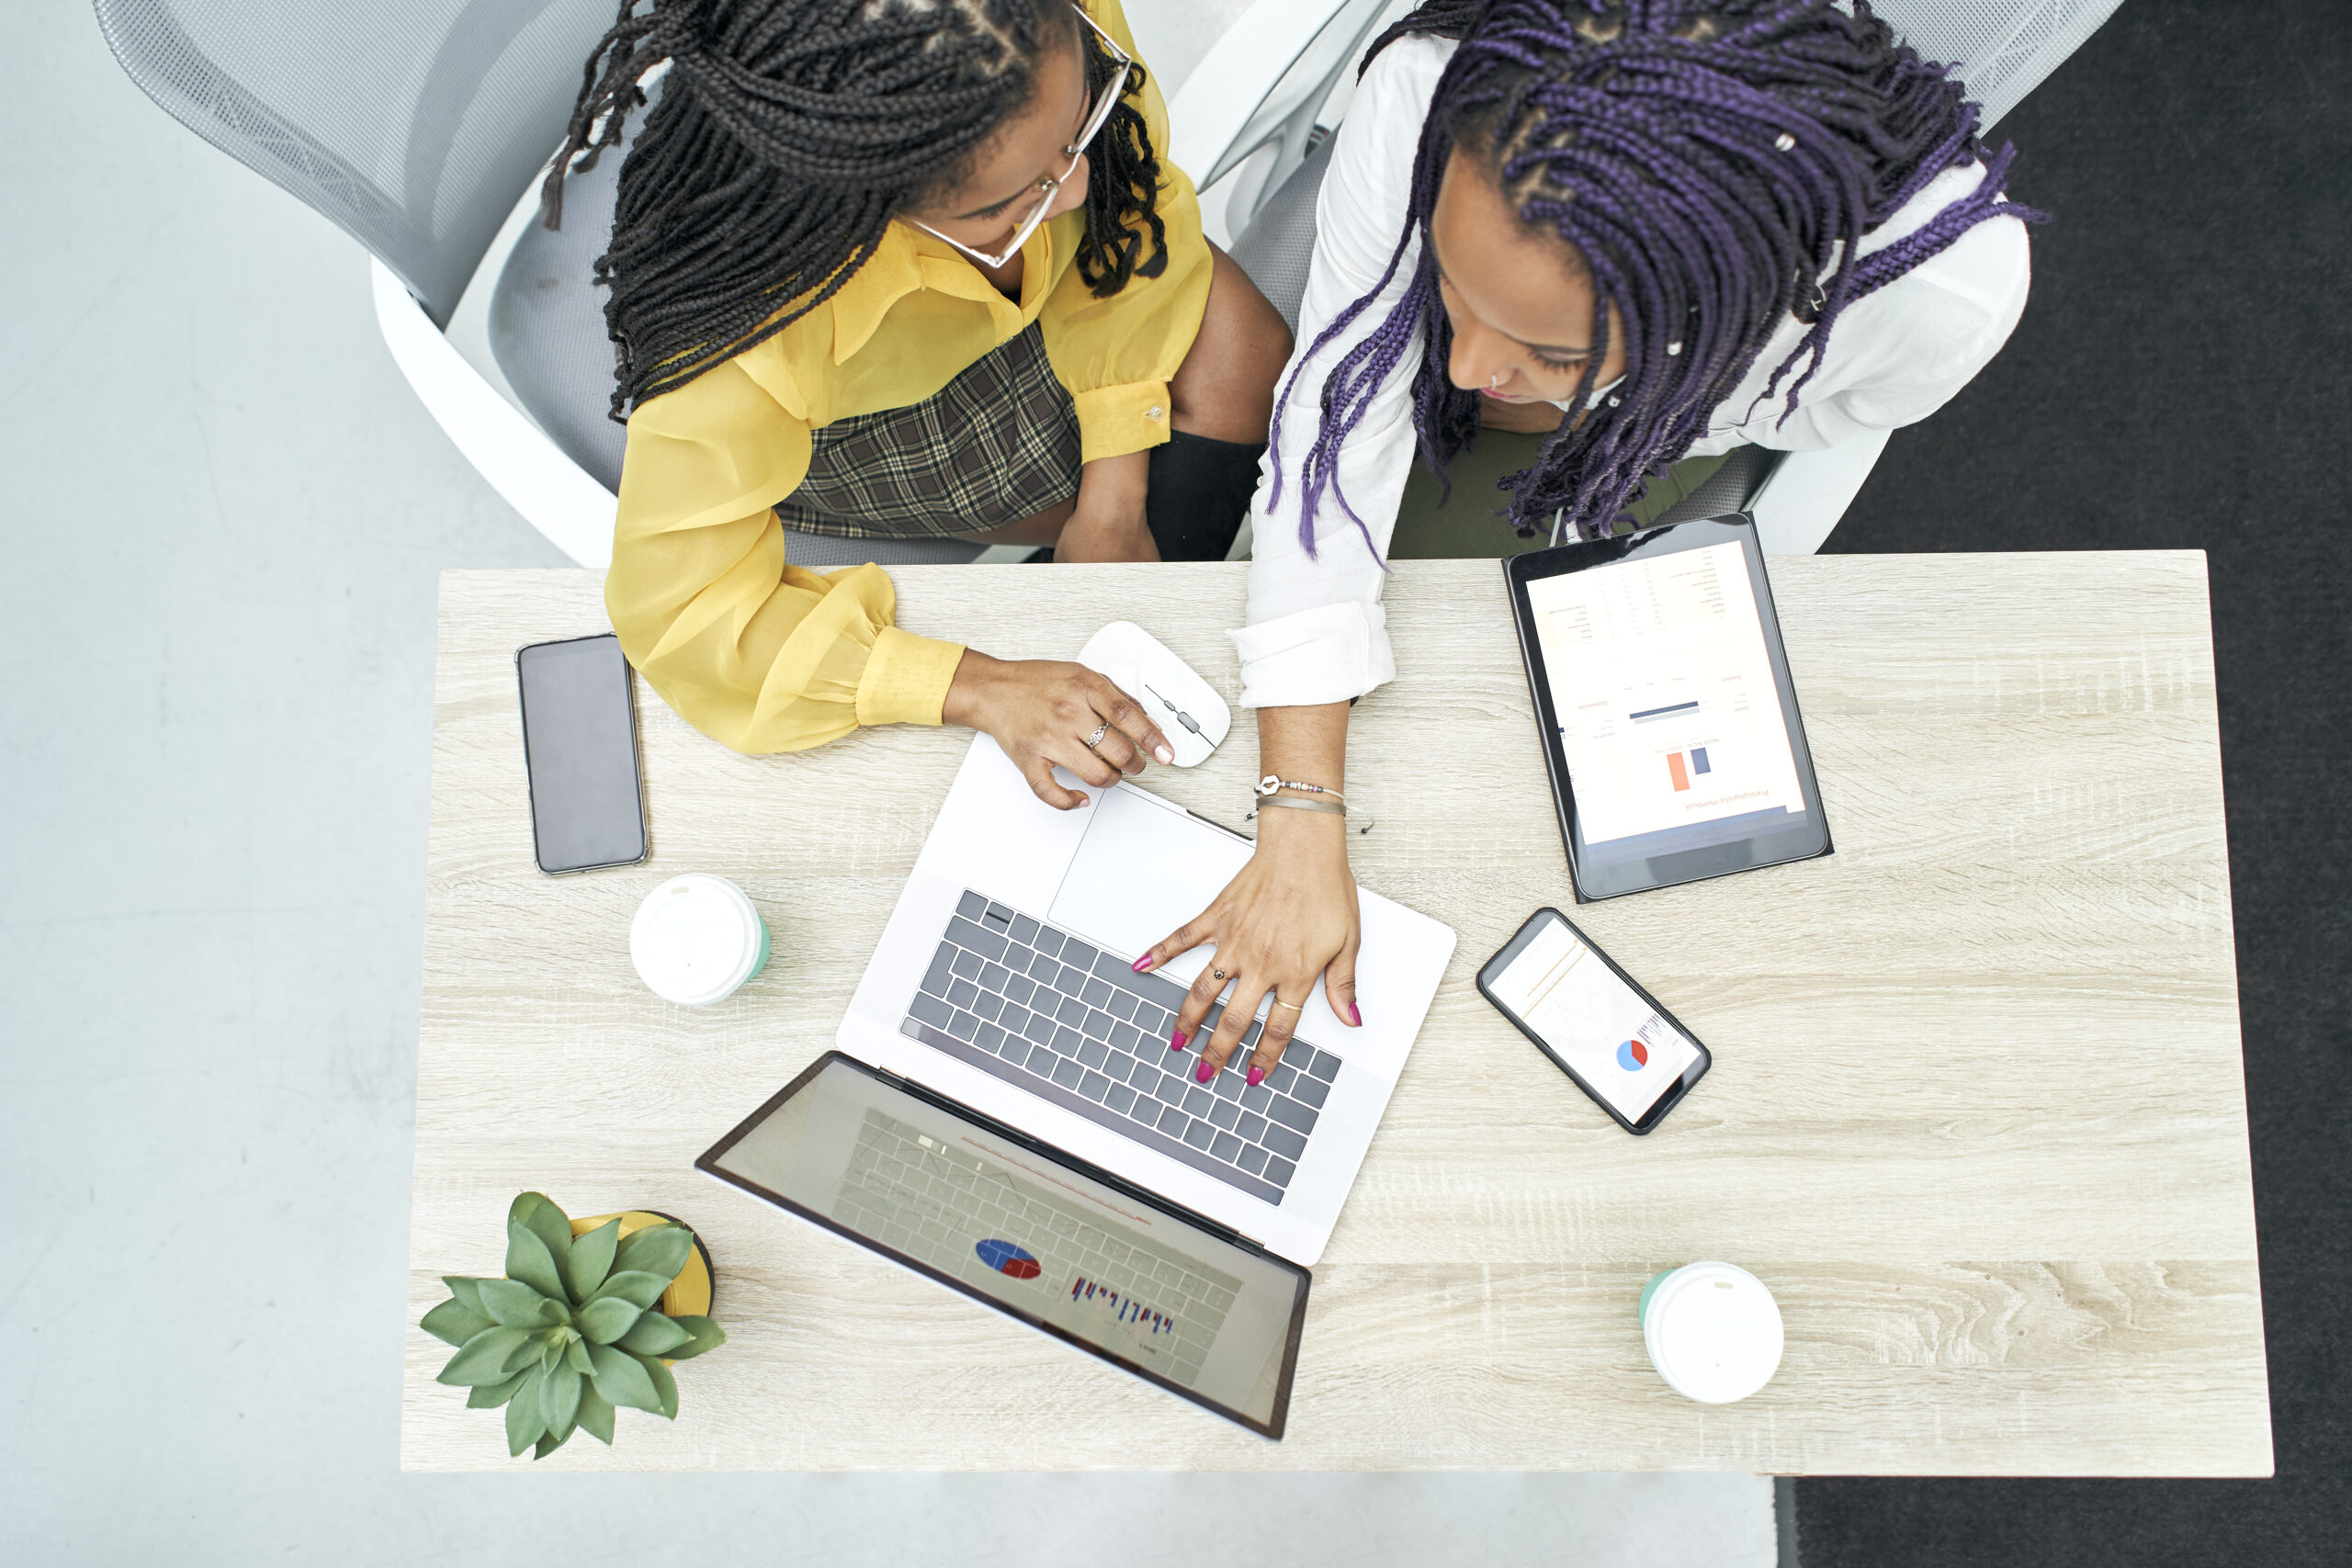 Top view of two young black women working in the office. Reviewing analytical data on various electronic devices. Zenith view.